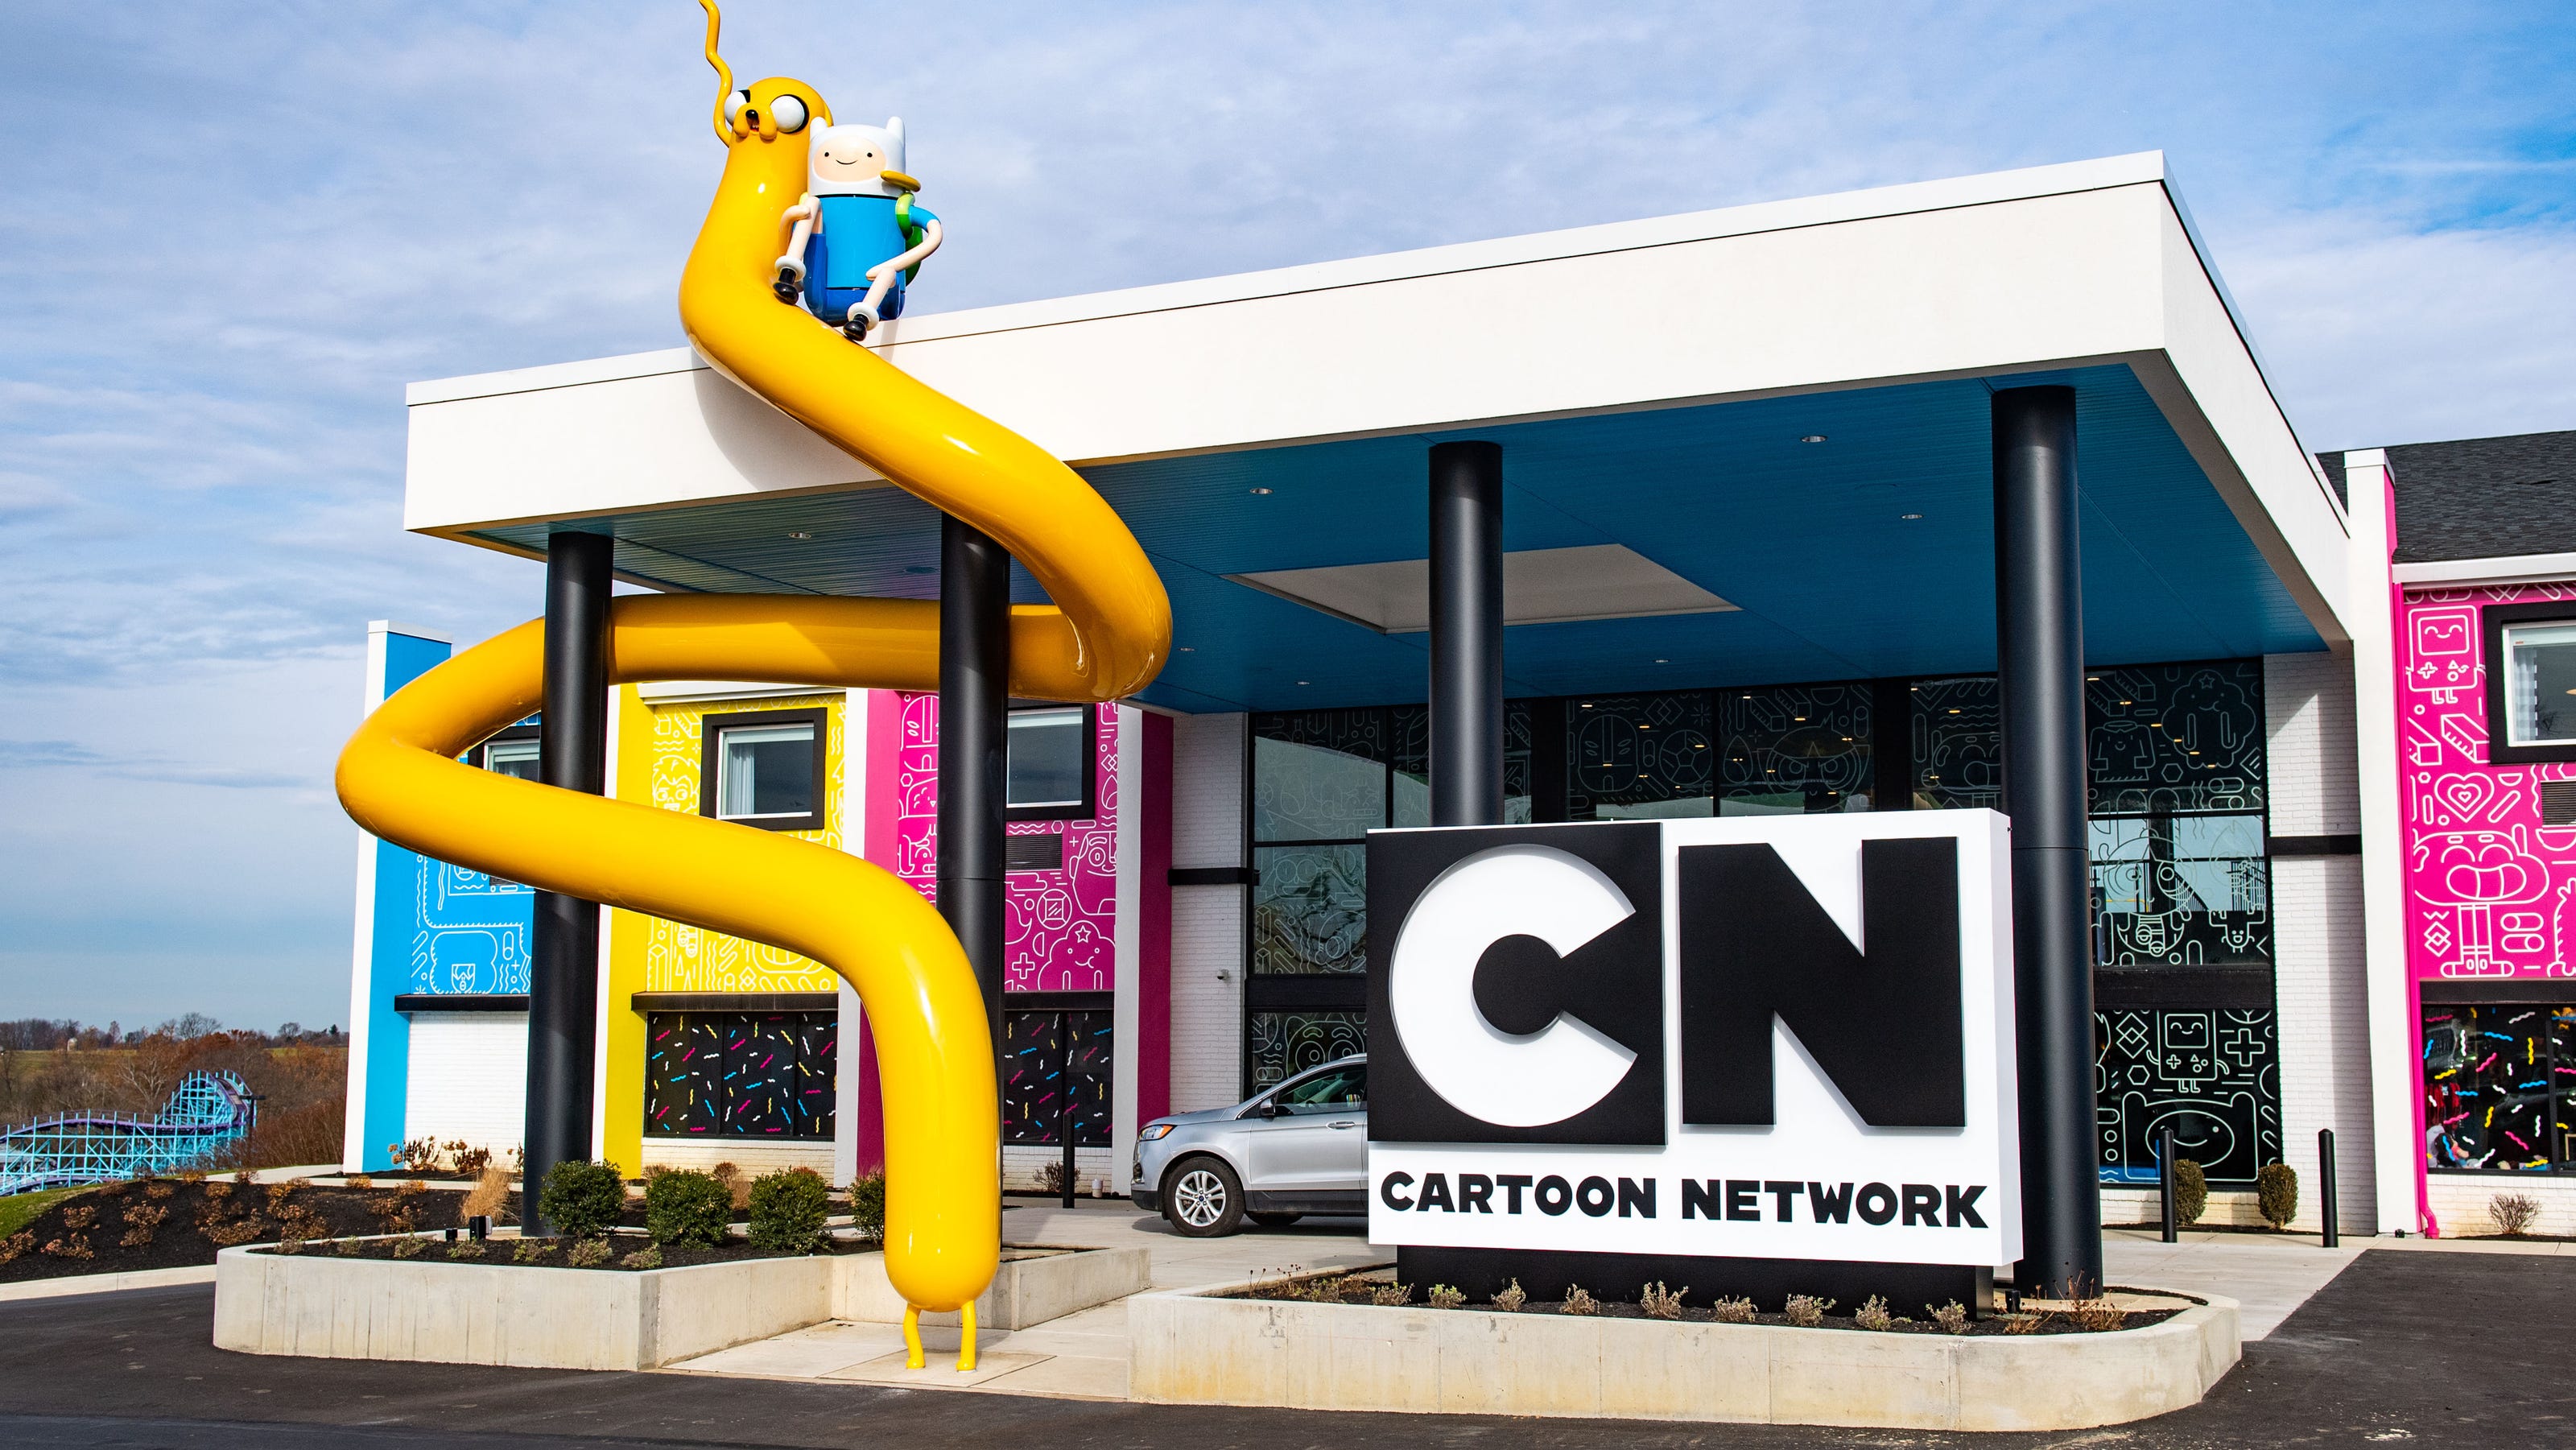 Cartoon Network Hotel in Pennsylvania: Review from a 10-year-old